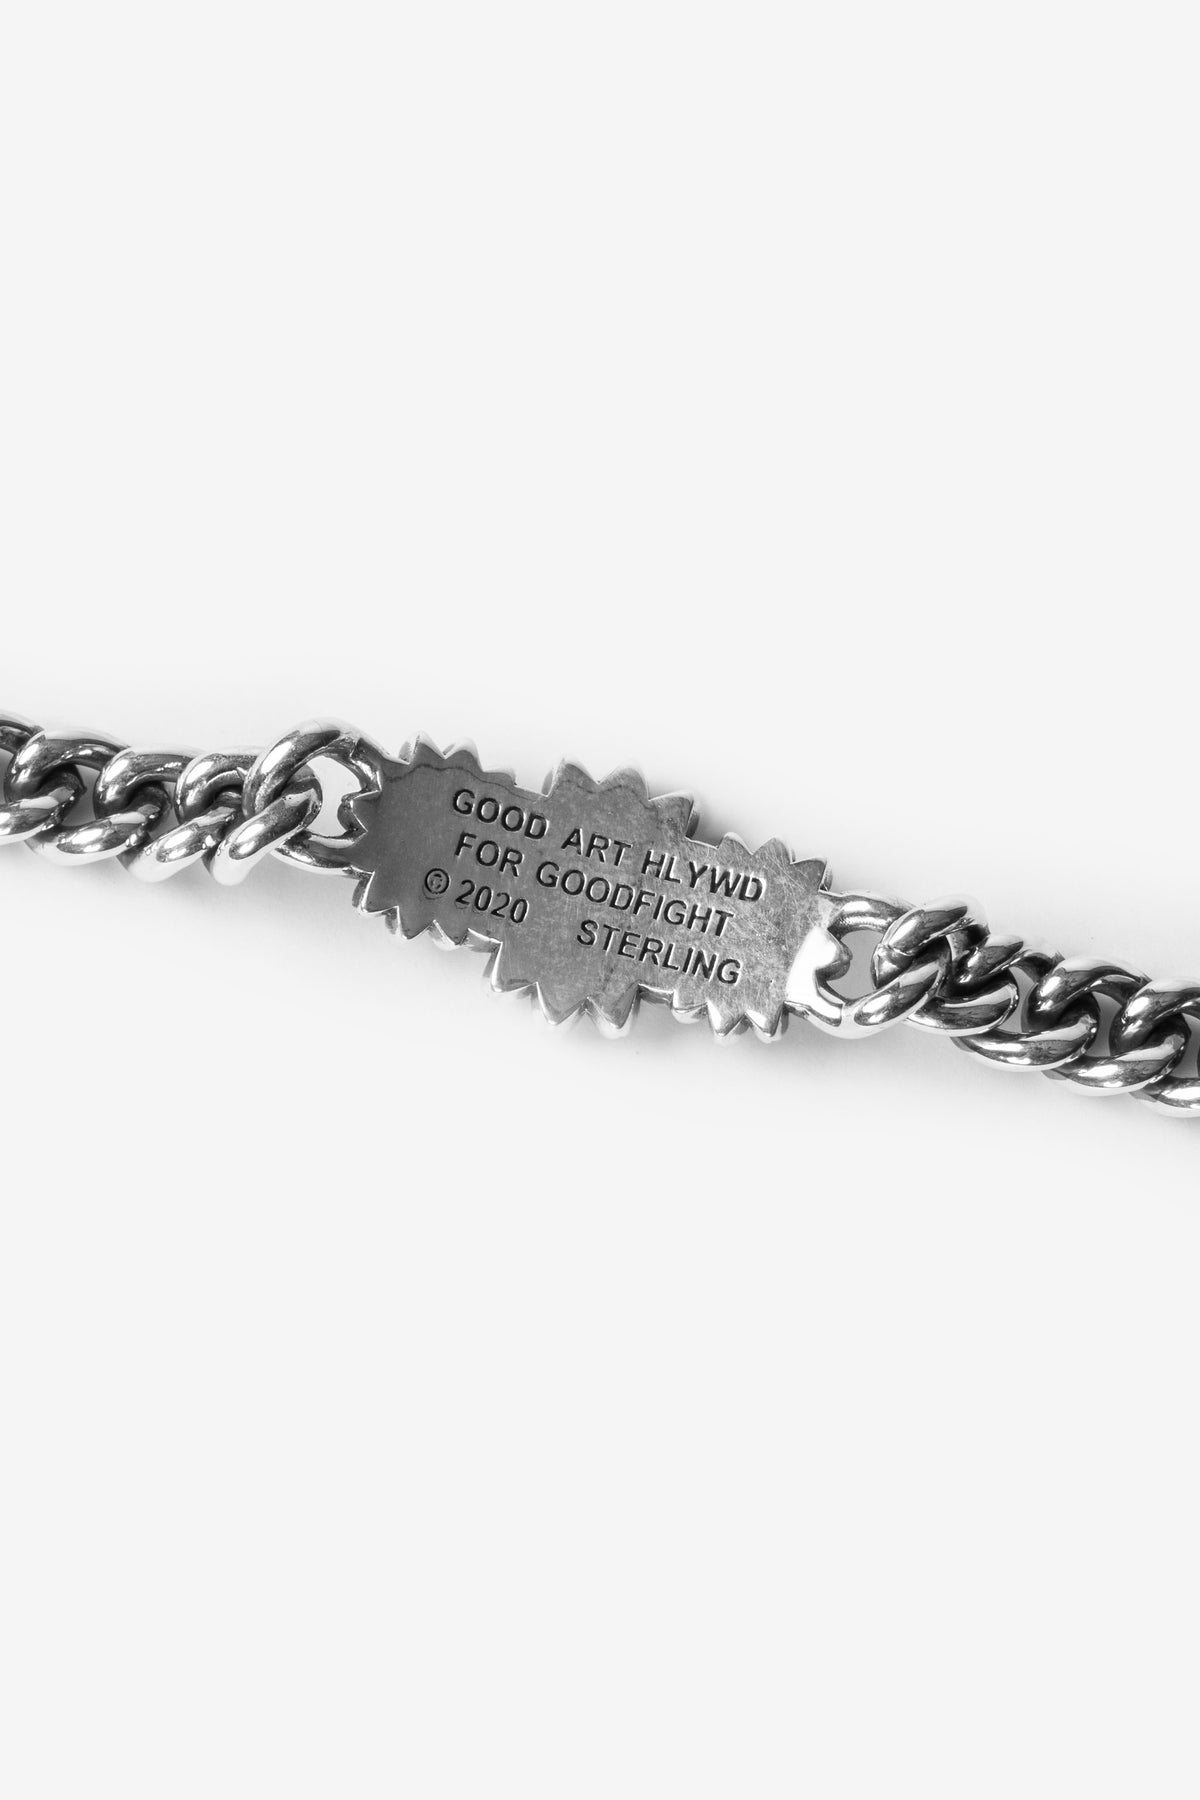 Good Art Hlywd for Goodfight Corsage ID Bracelet 18cm / Silver